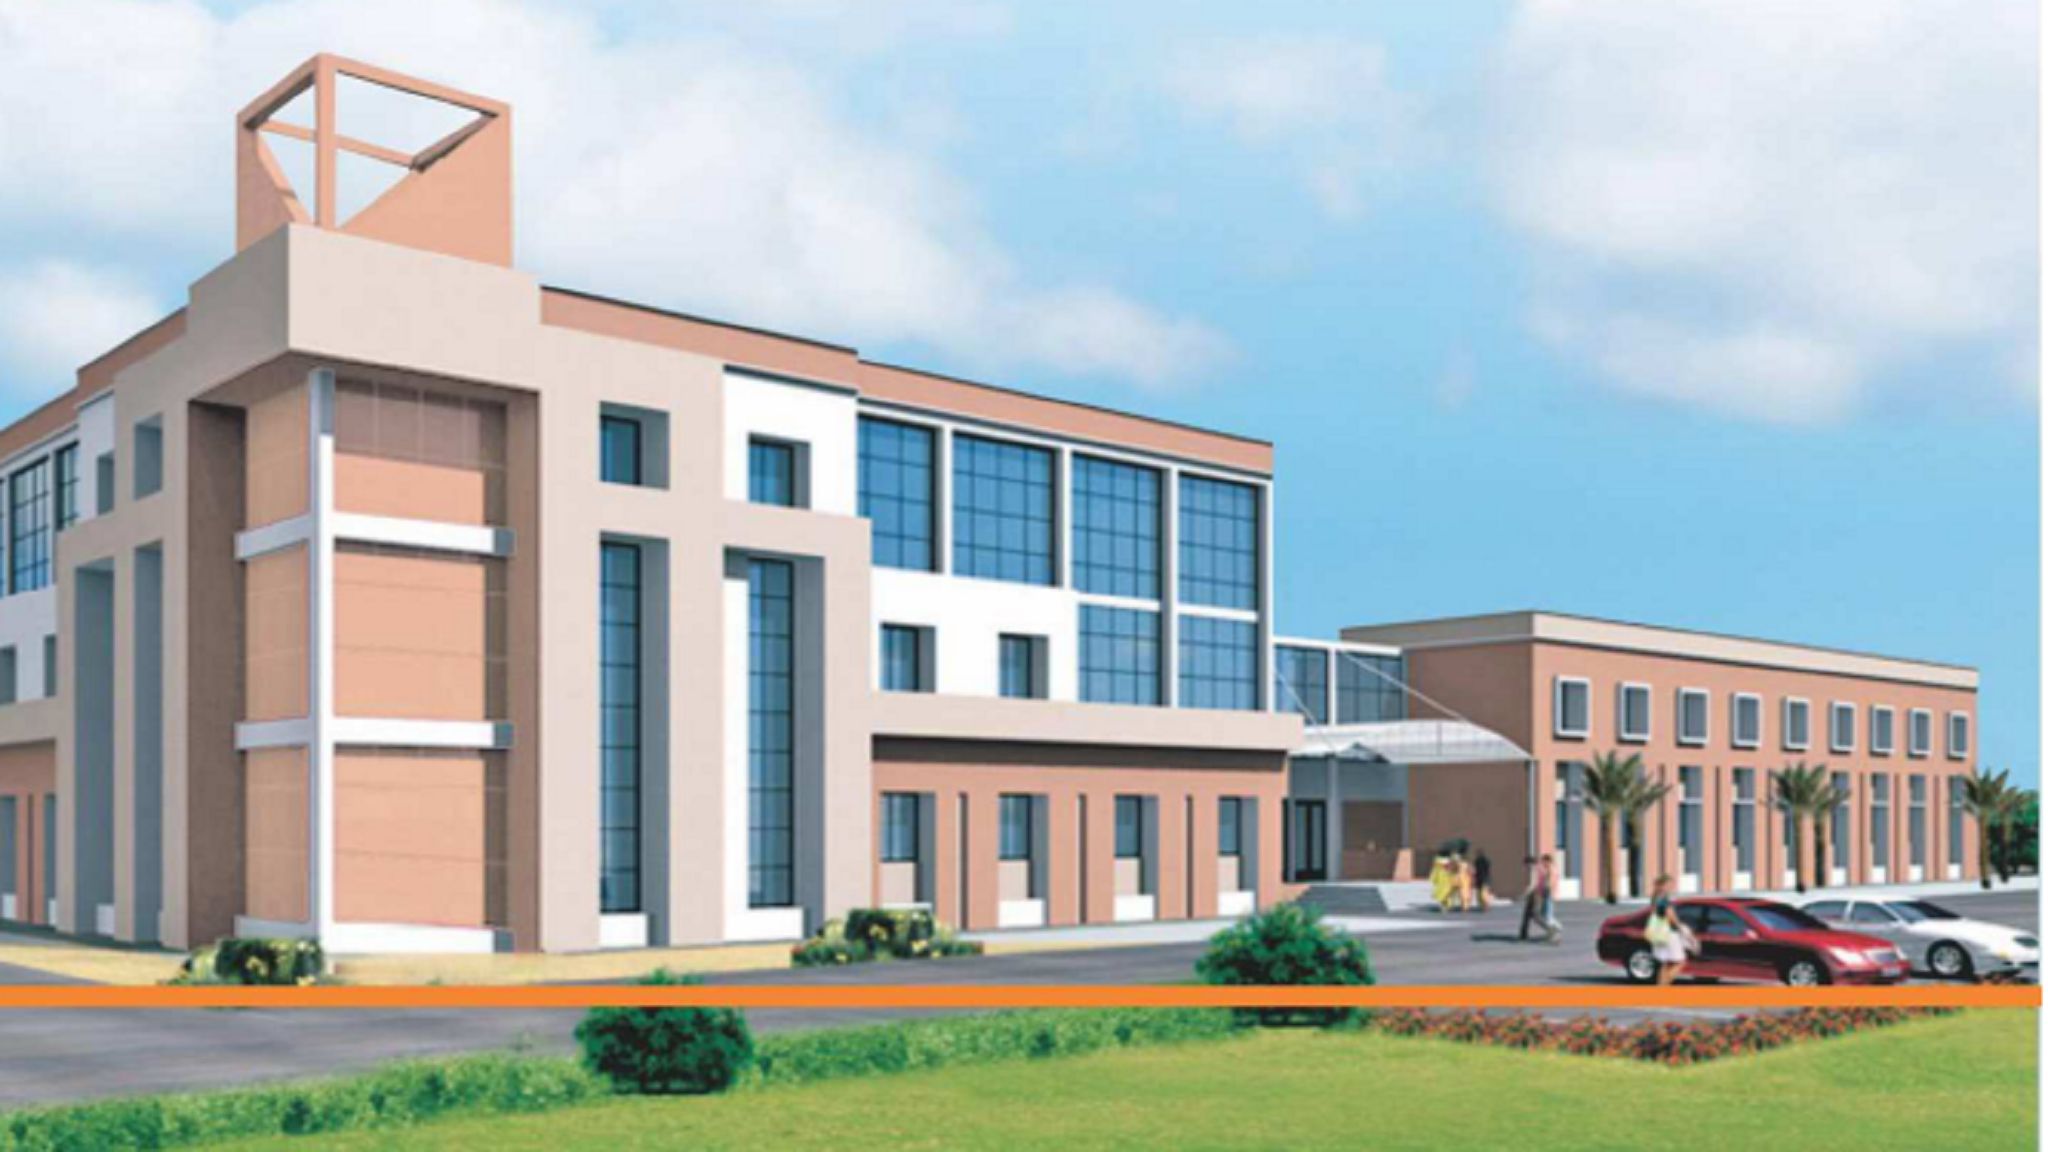 sai group of institutions